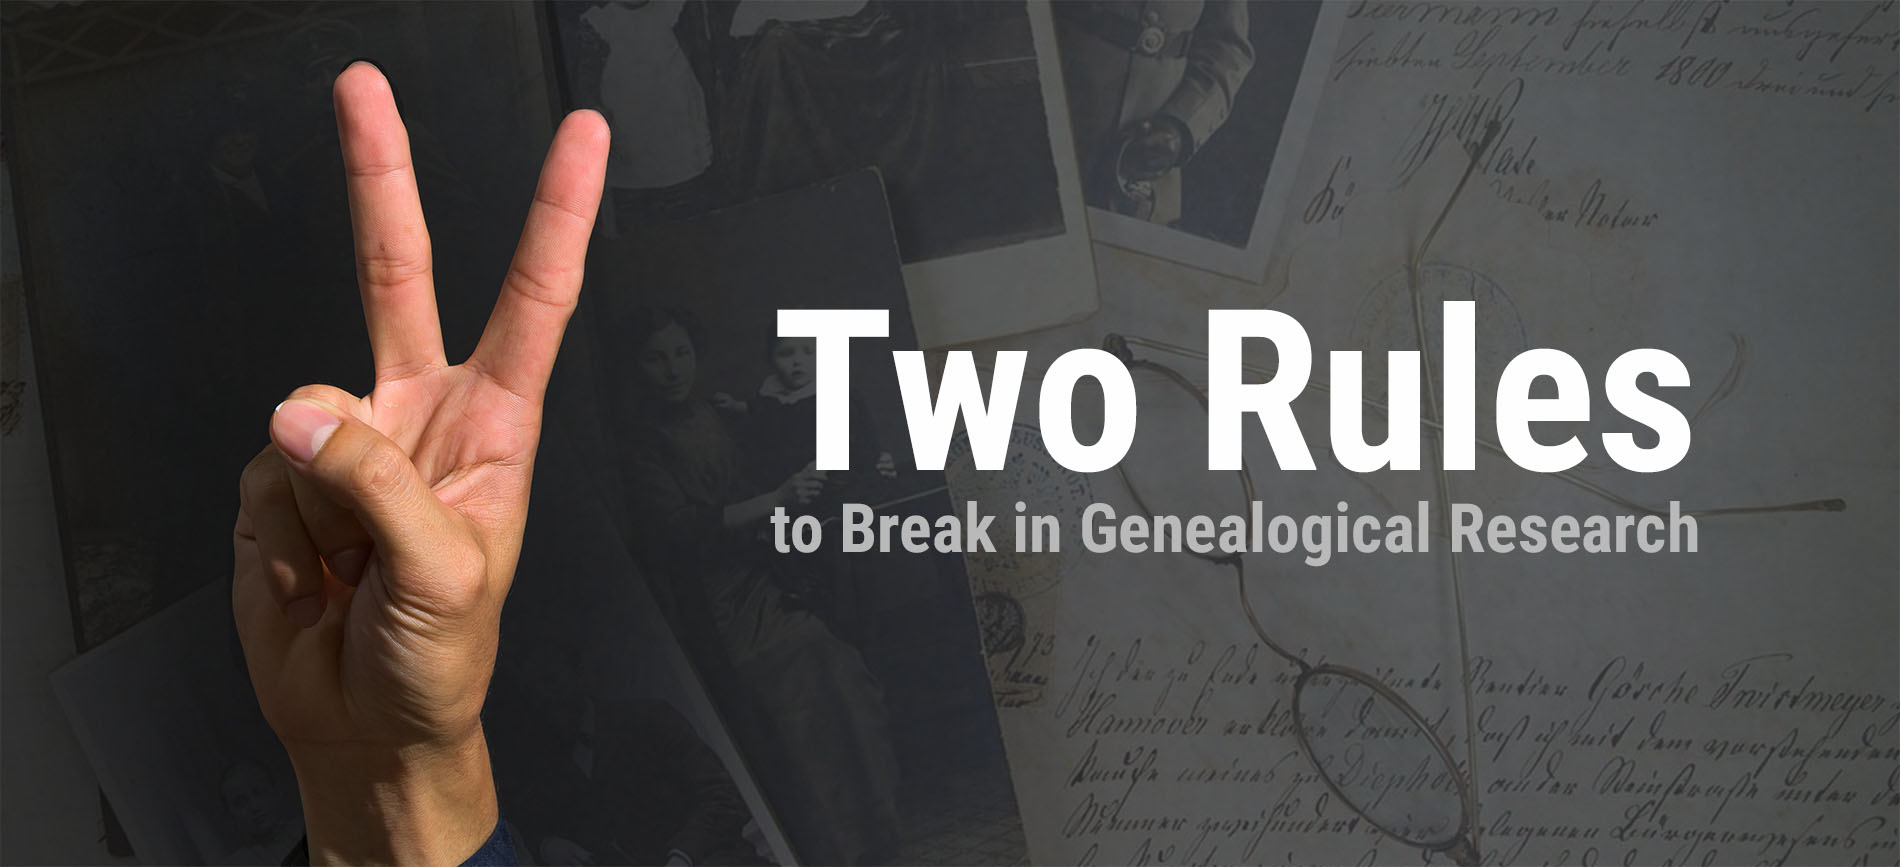 Two Rules to Break in Genealogical Research